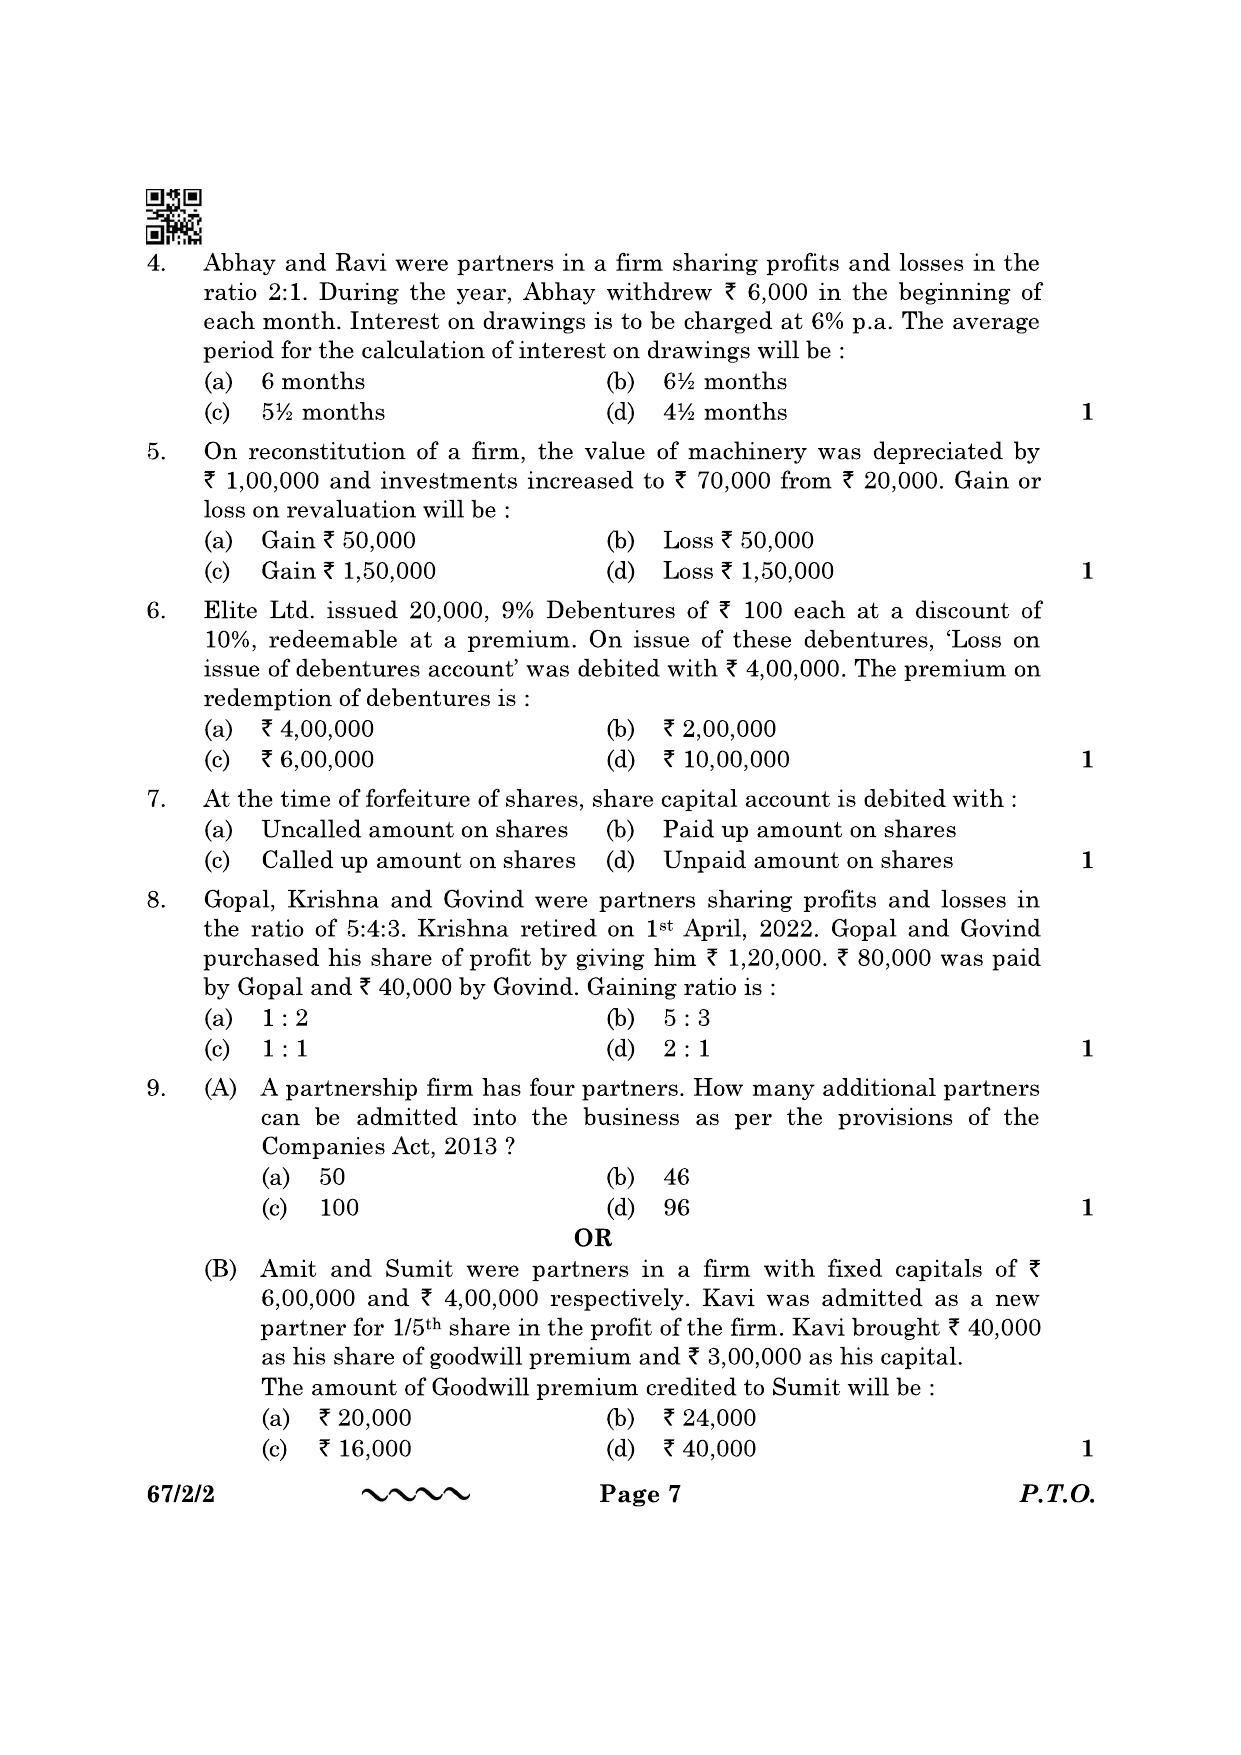 CBSE Class 12 67-2-2 Accountancy 2023 Question Paper - Page 7